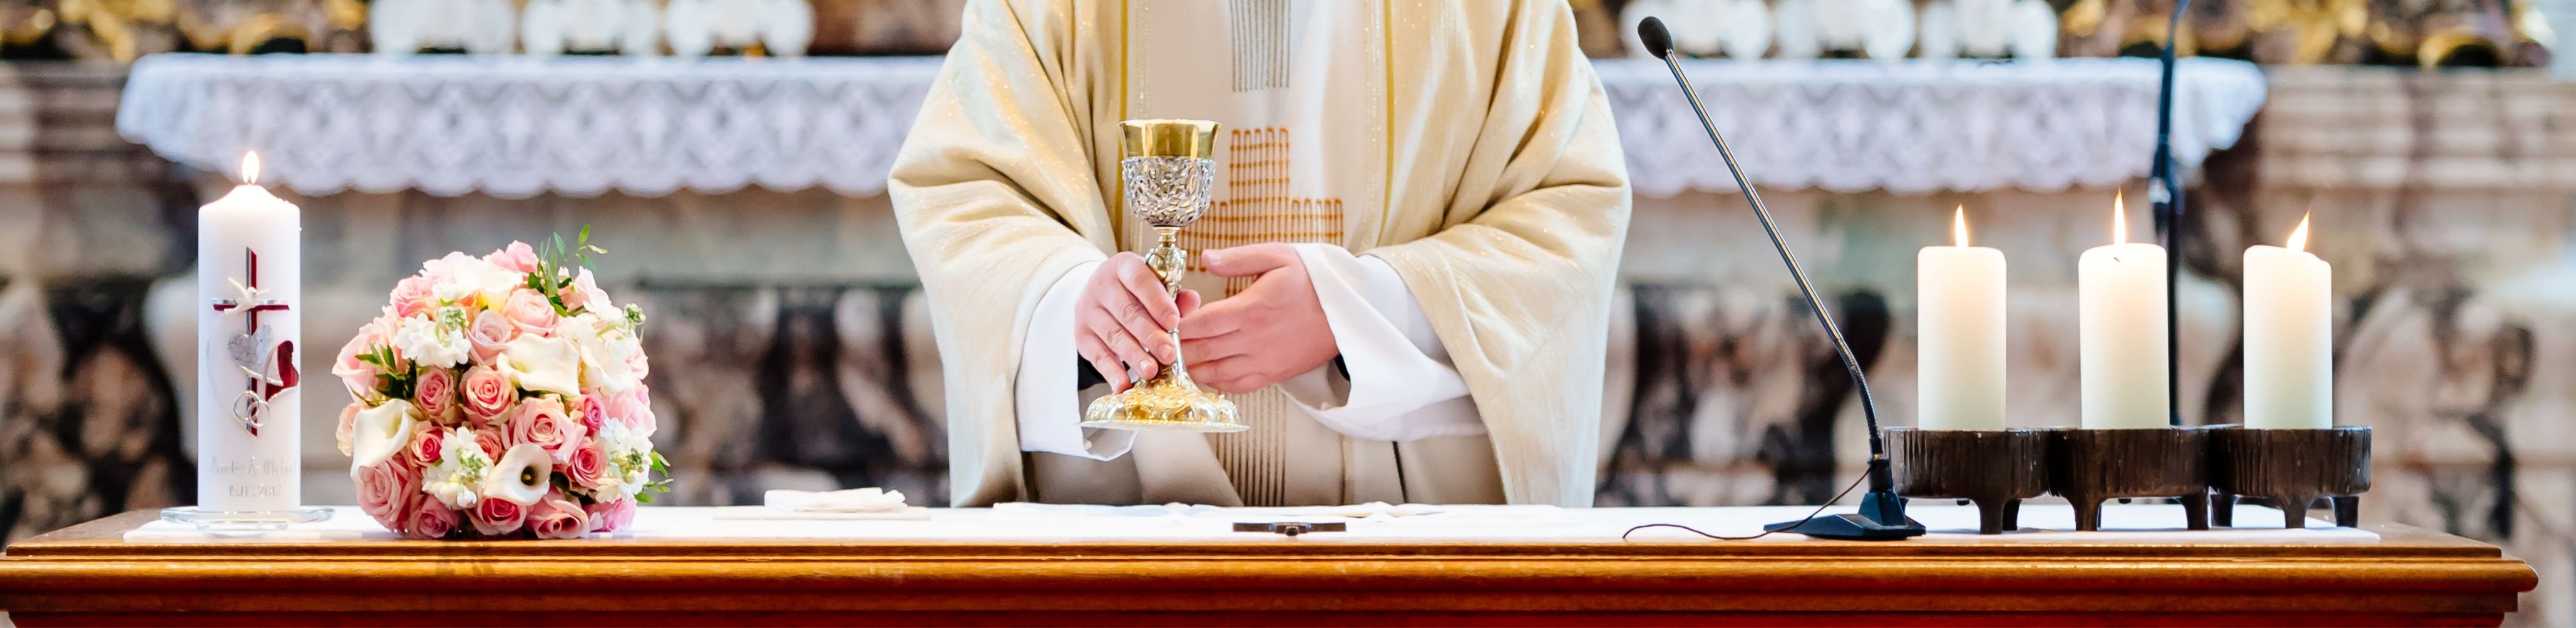 image of priest at altar celebrating mass, holding the ciborium, candles are lit on either side, and there is a bouquet of roses on the altar